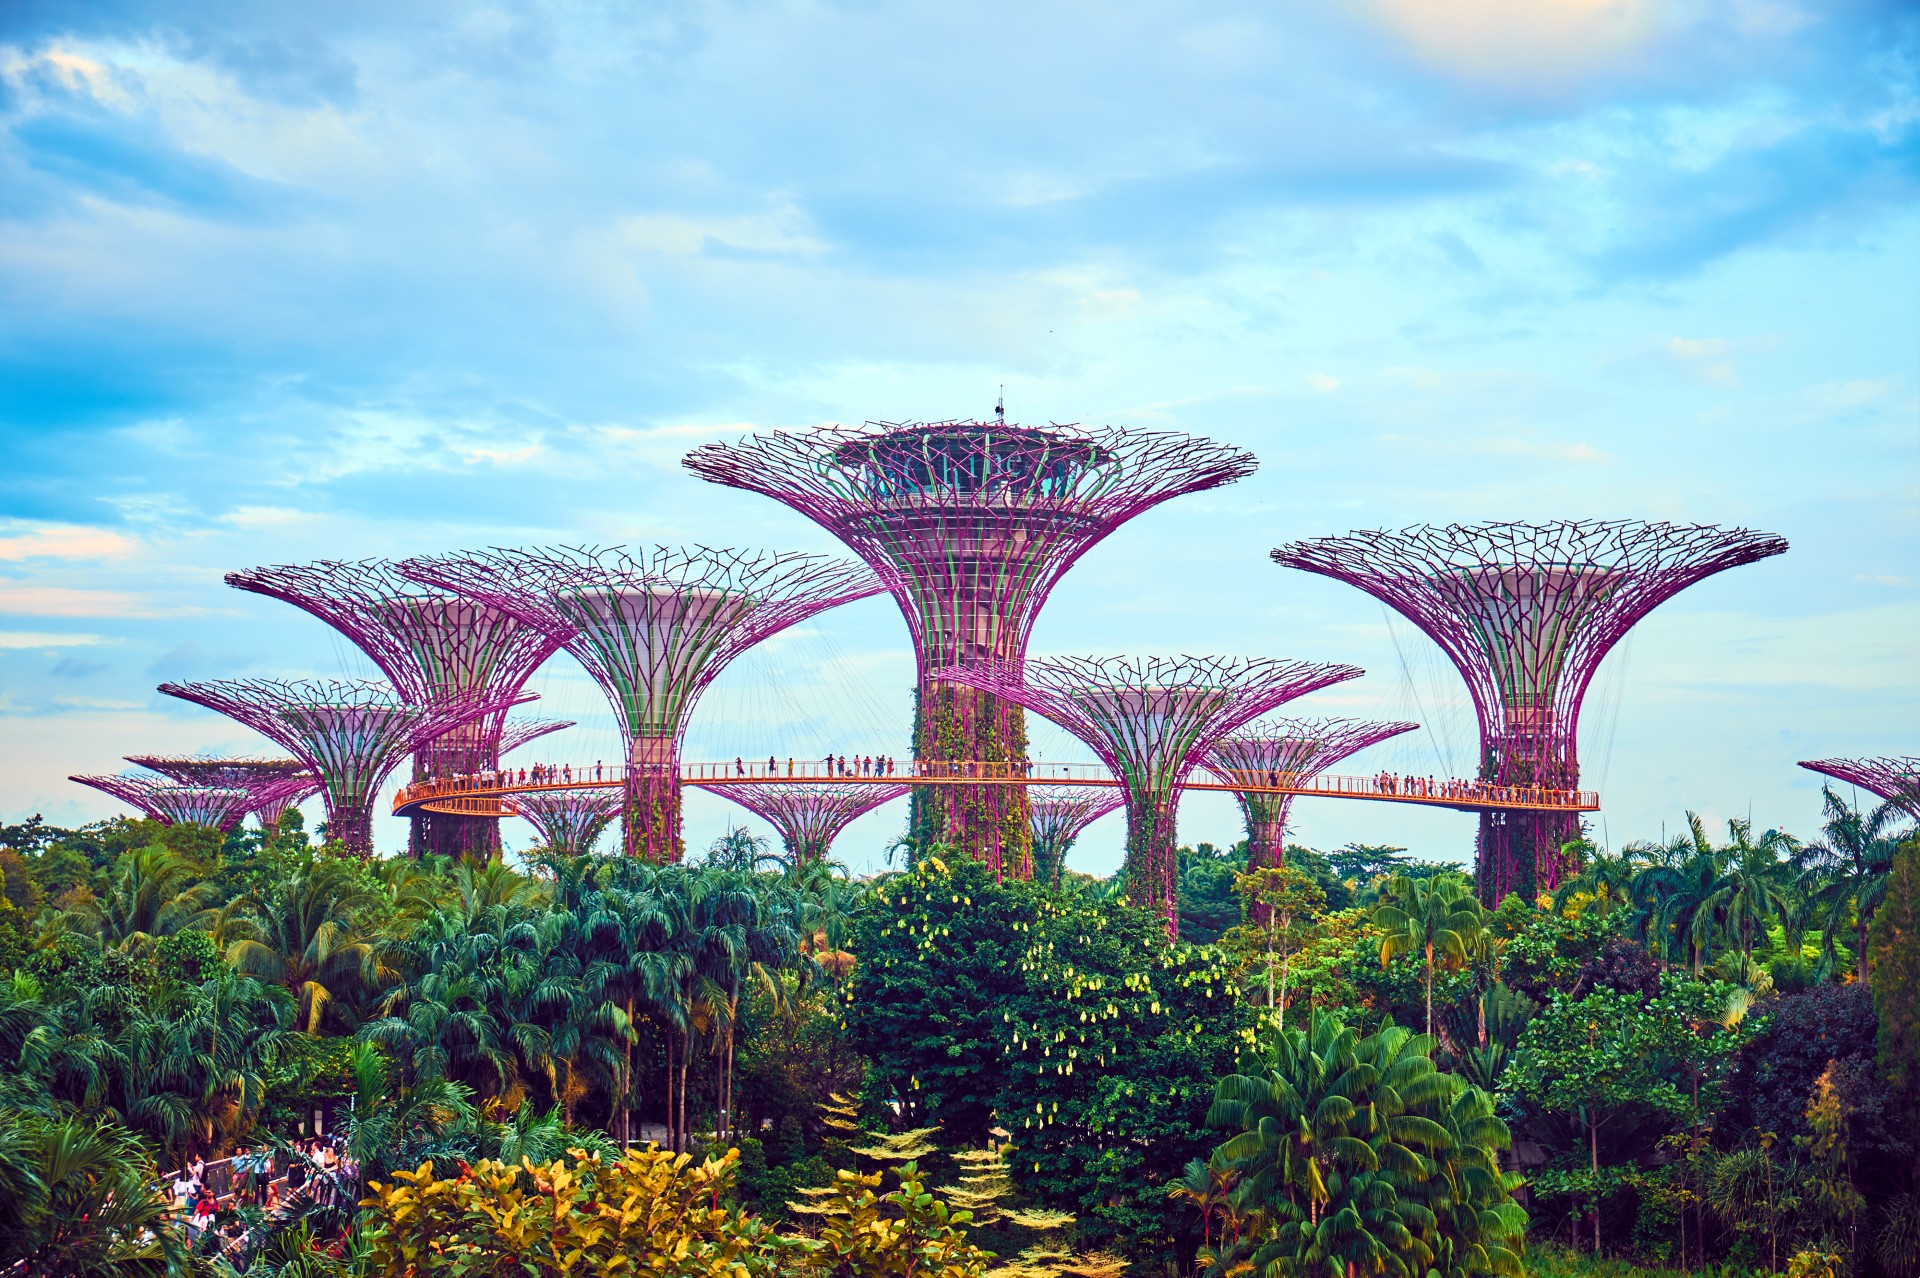 A picture of the gardens by the bay